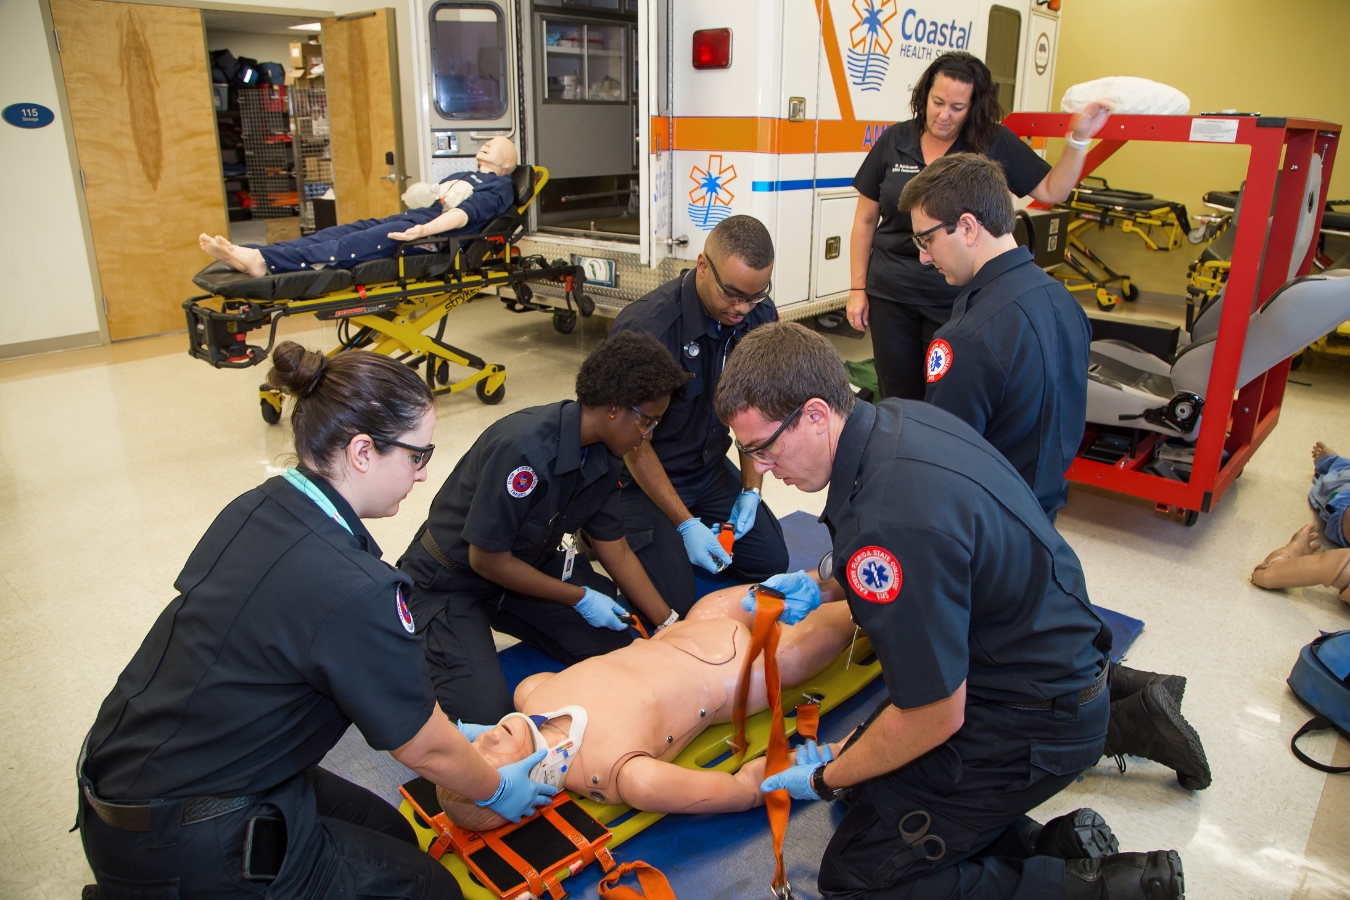 Diverse group of EMS/EMT students training in an environment with an ambulance, human patient simulation dummies, real-world tools, and instructor.